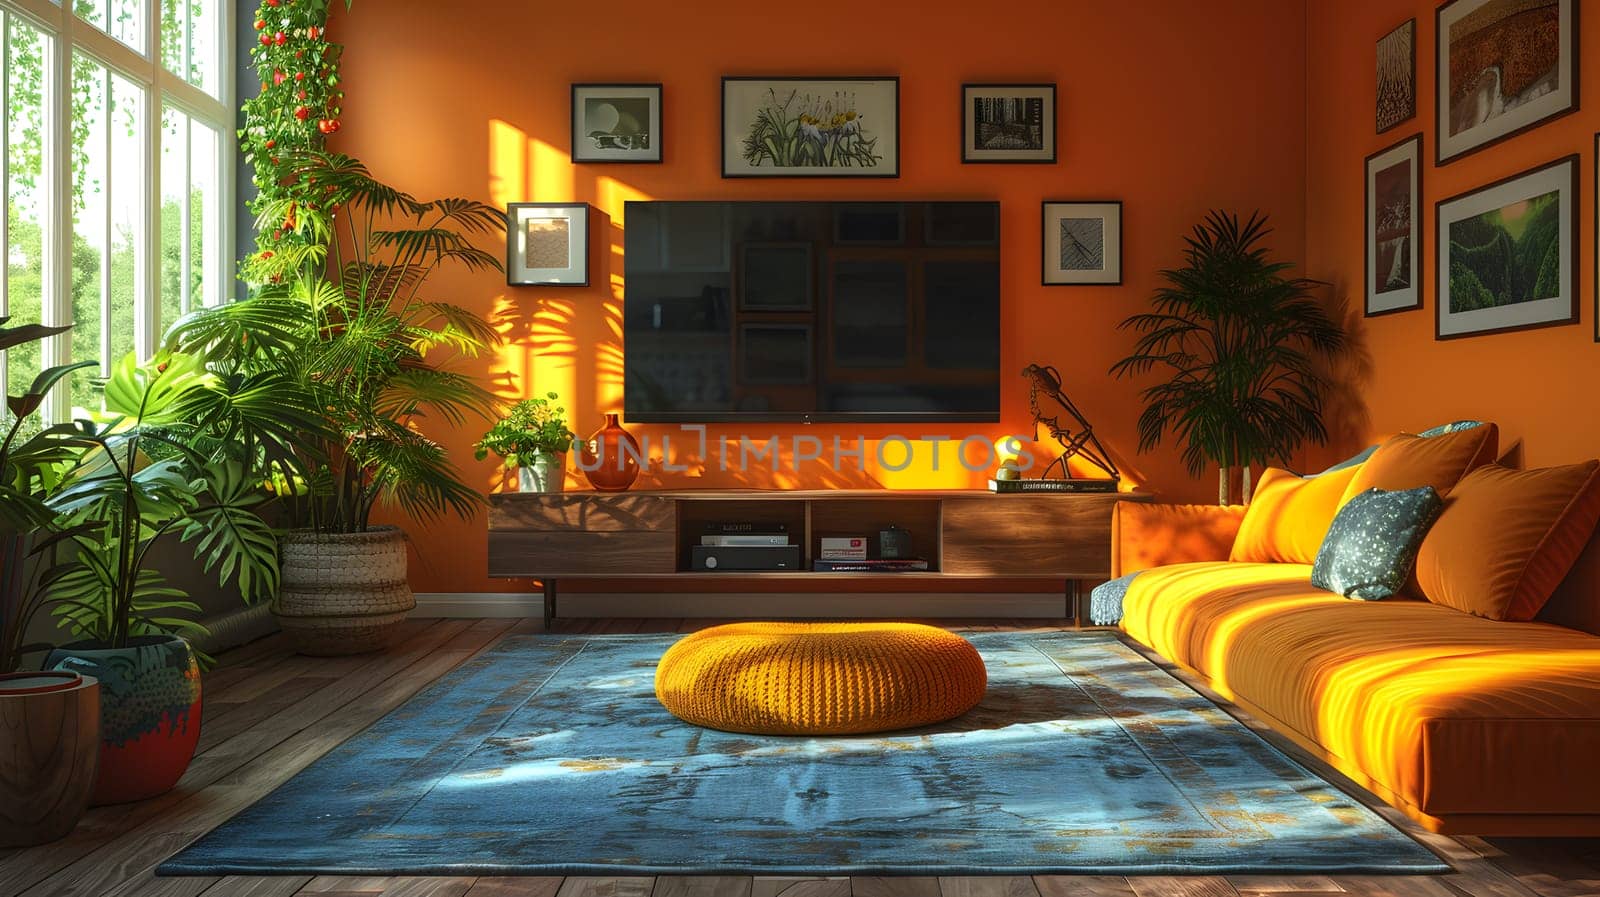 A vibrant living room with orange walls, wood flooring, a flat screen TV on the wall, and a cozy couch with a houseplant by the window